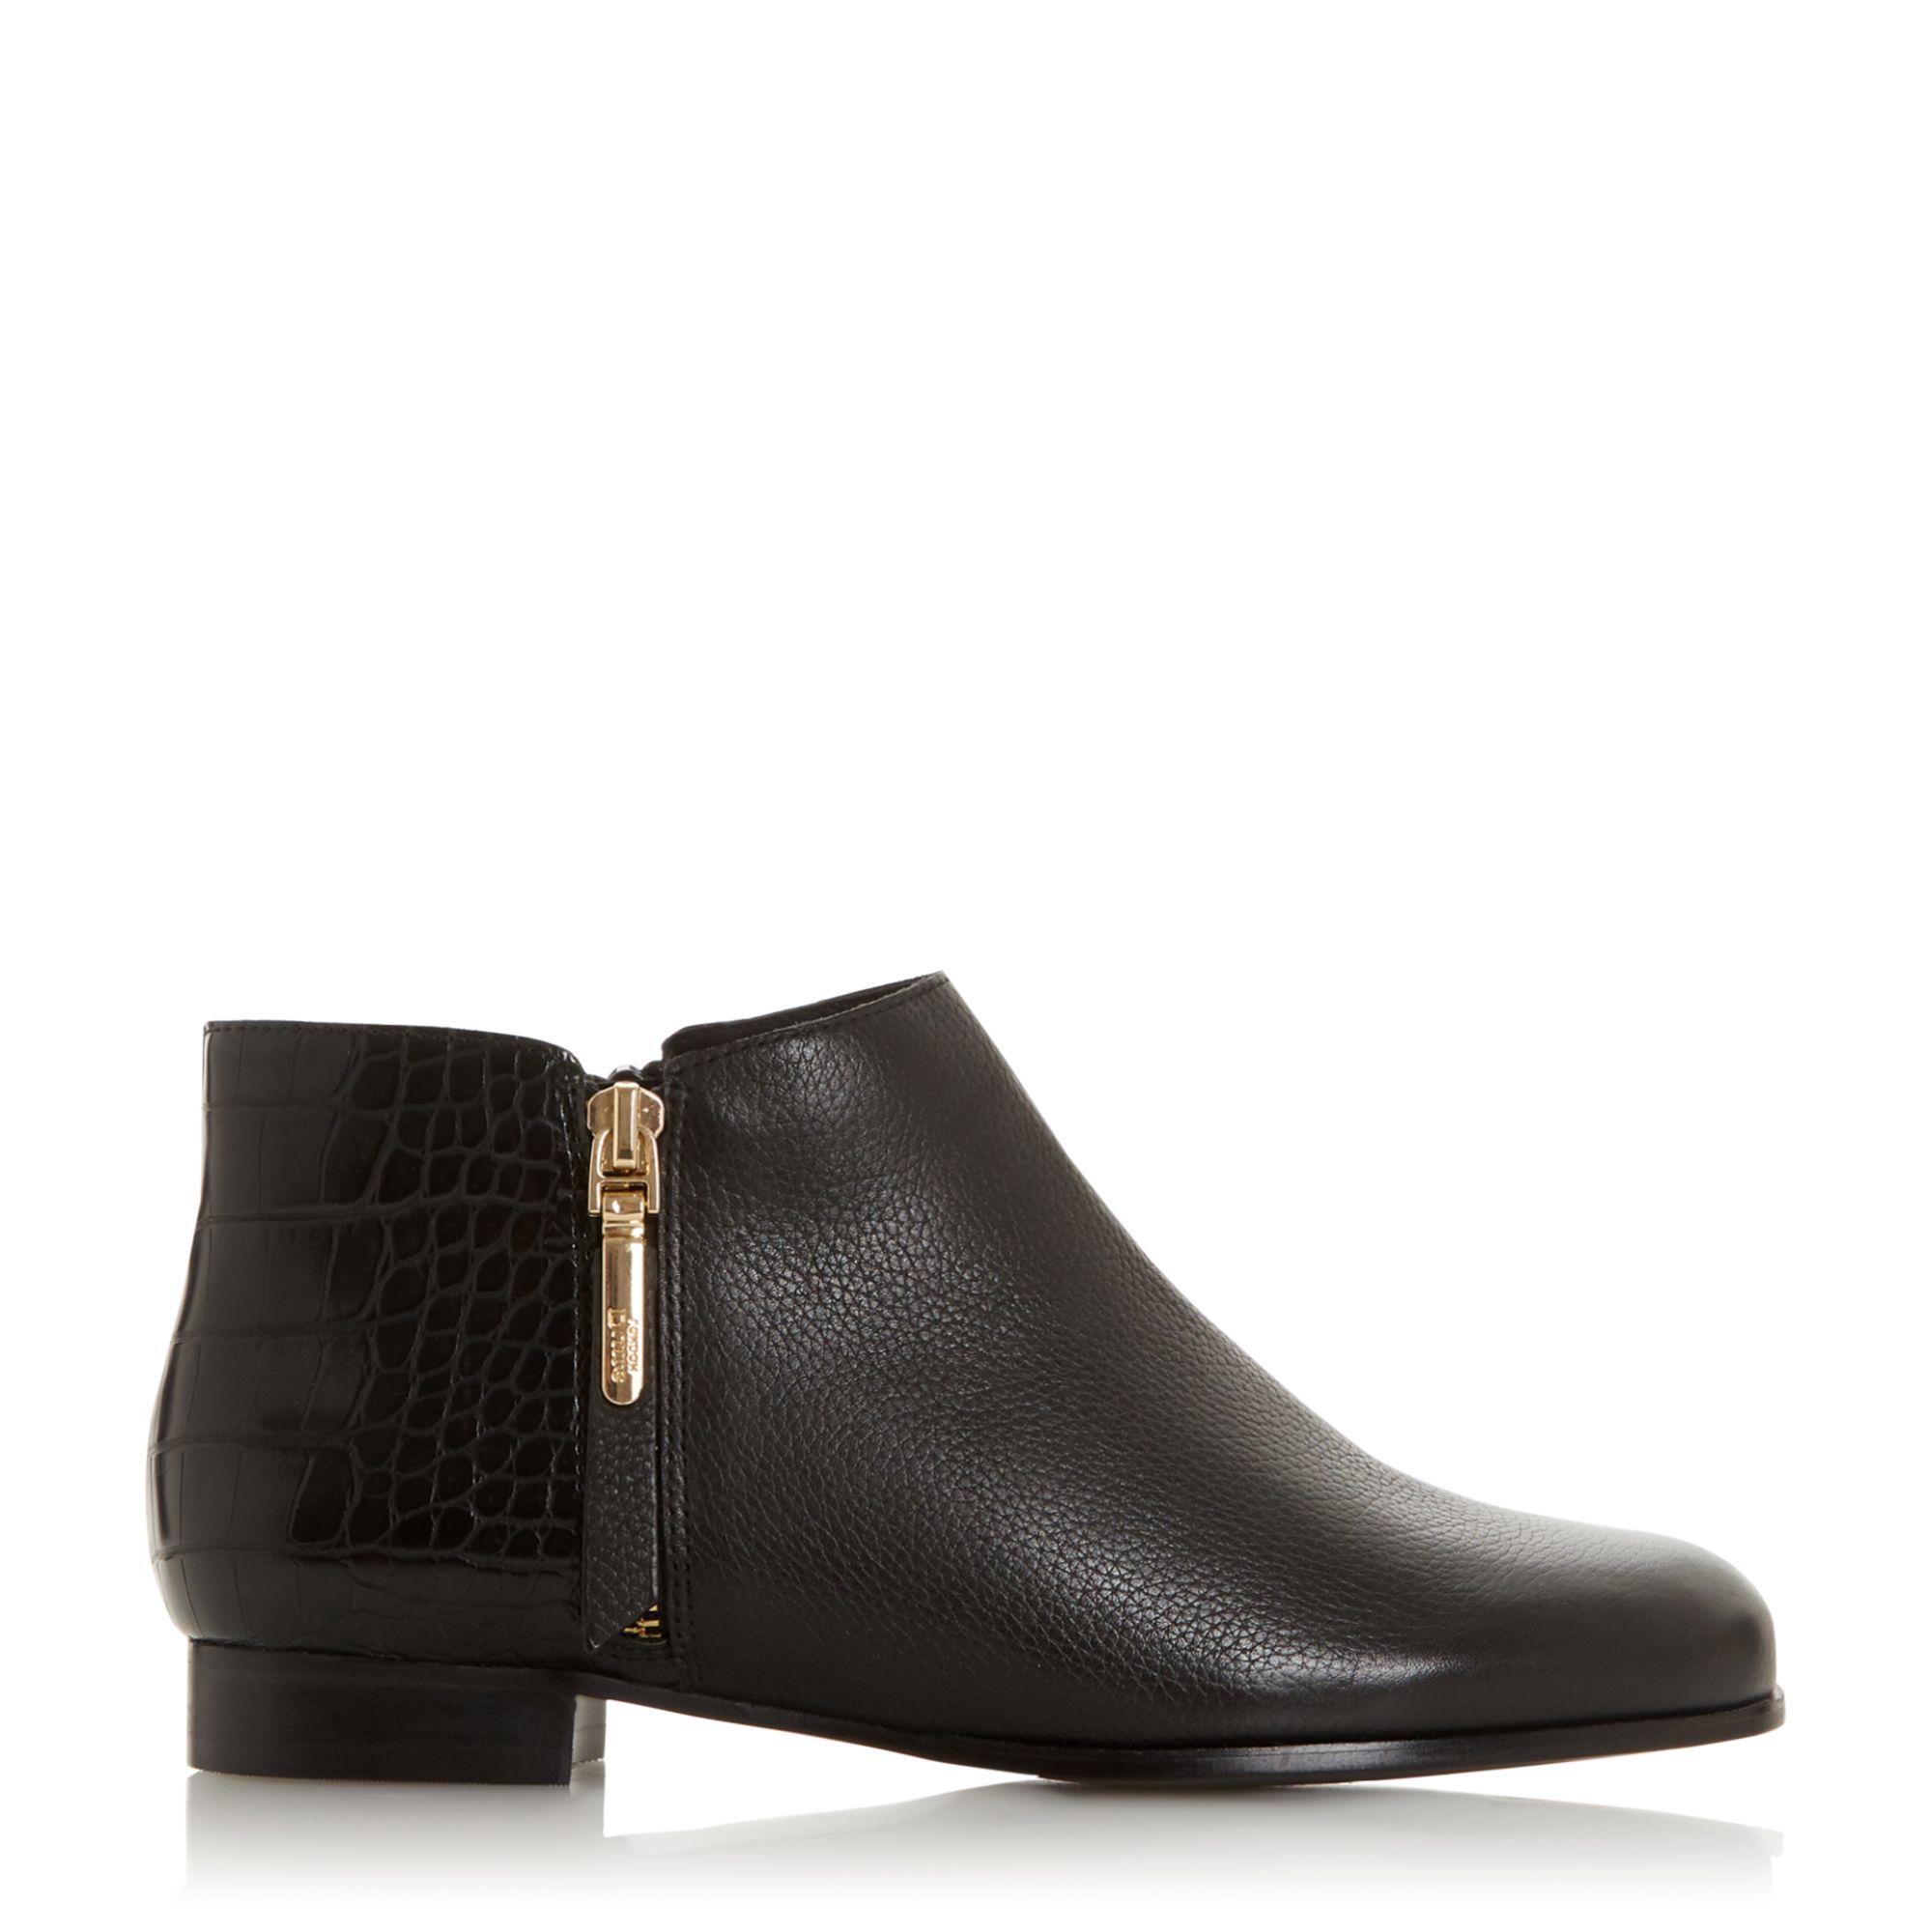 Dune Leather 'wf Pandan' Wide Fit Ankle Boots in Black - Lyst